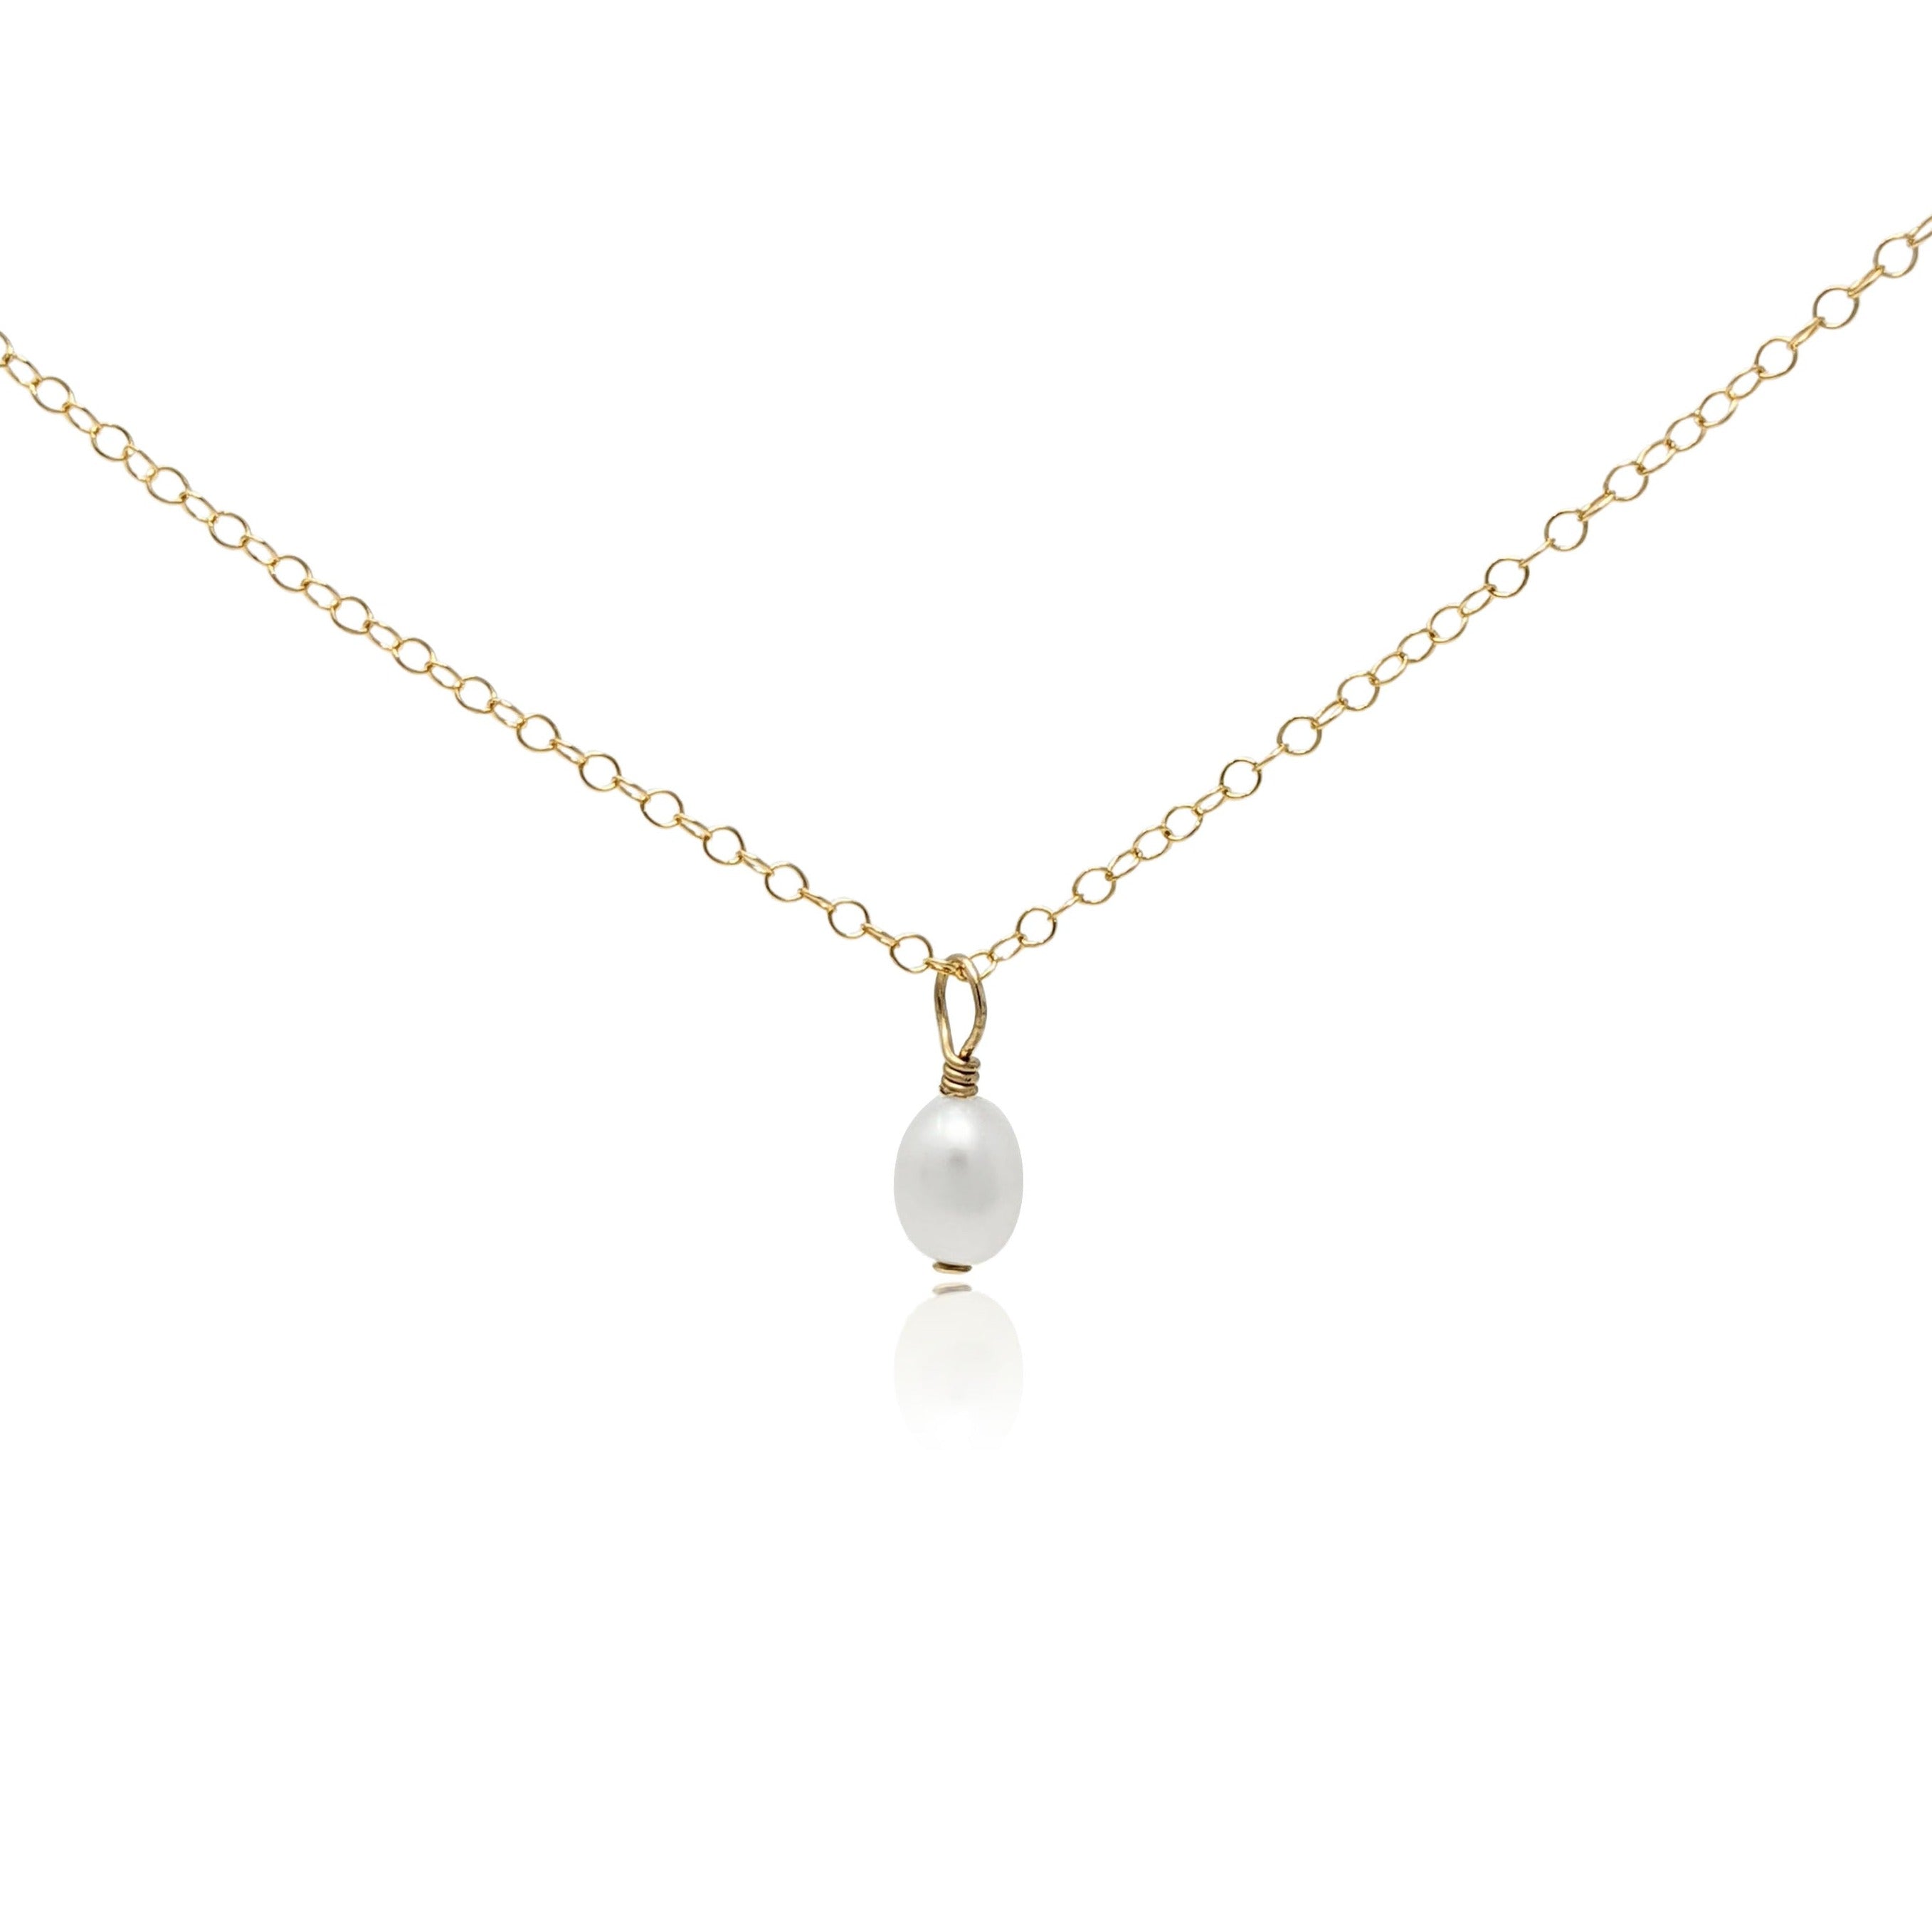 Small baroque pearl hanging as a pendant on a gold necklace